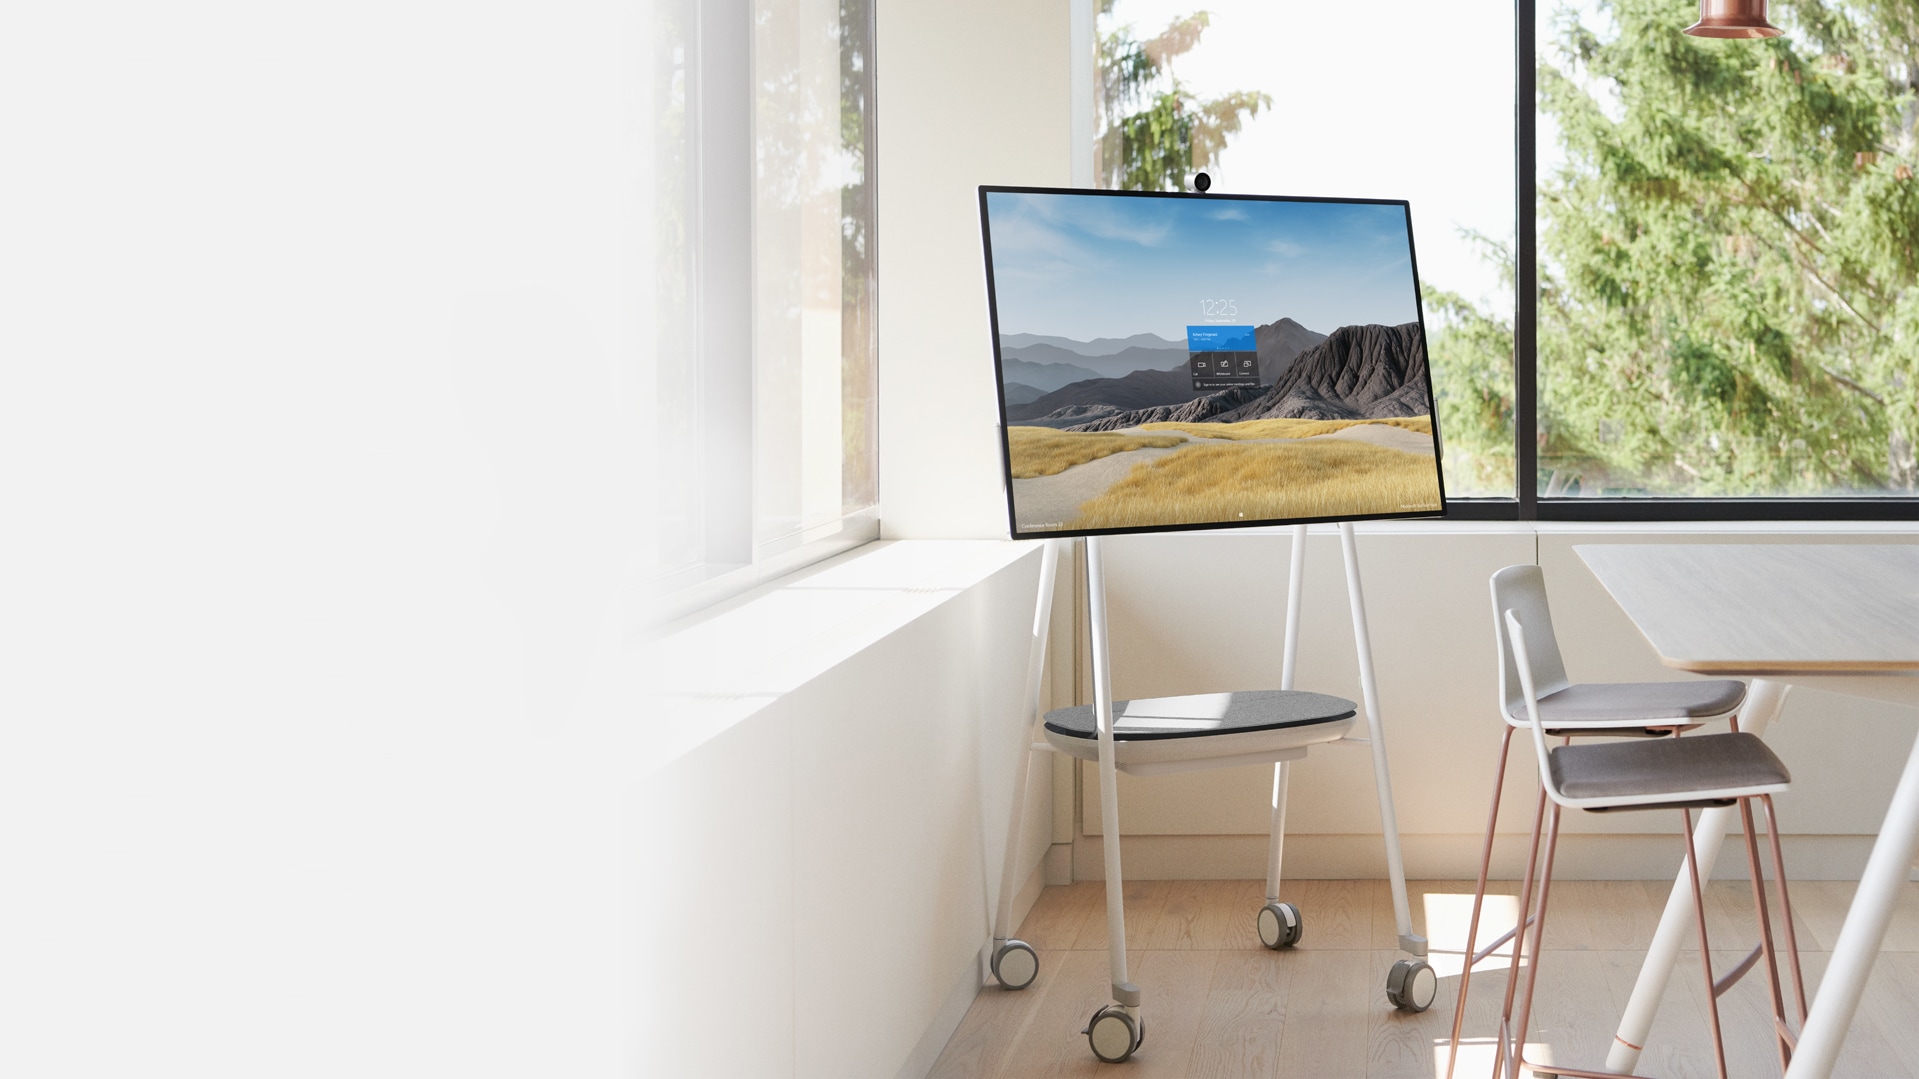 A Surface Hub 2S in the 50-inch size is shown in an office setting